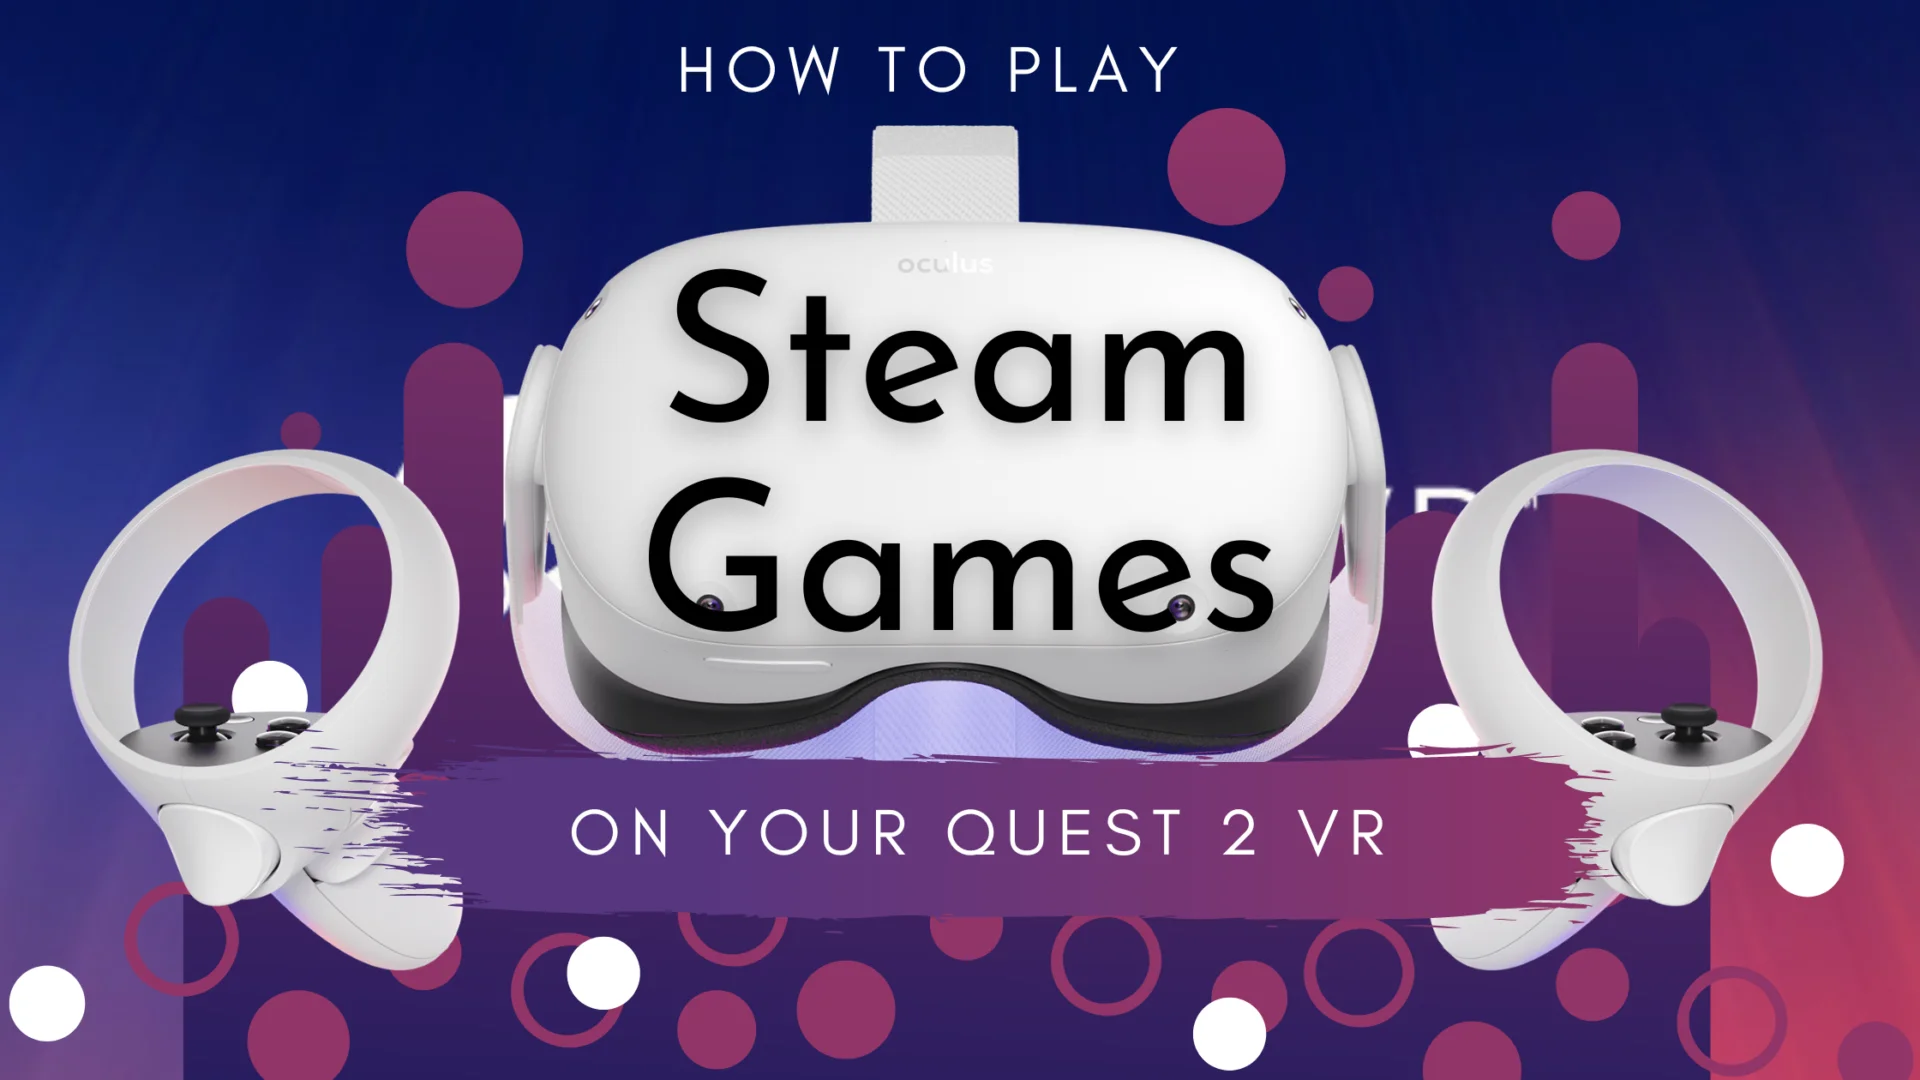 How to Play Steam Games on Quest 2 VR